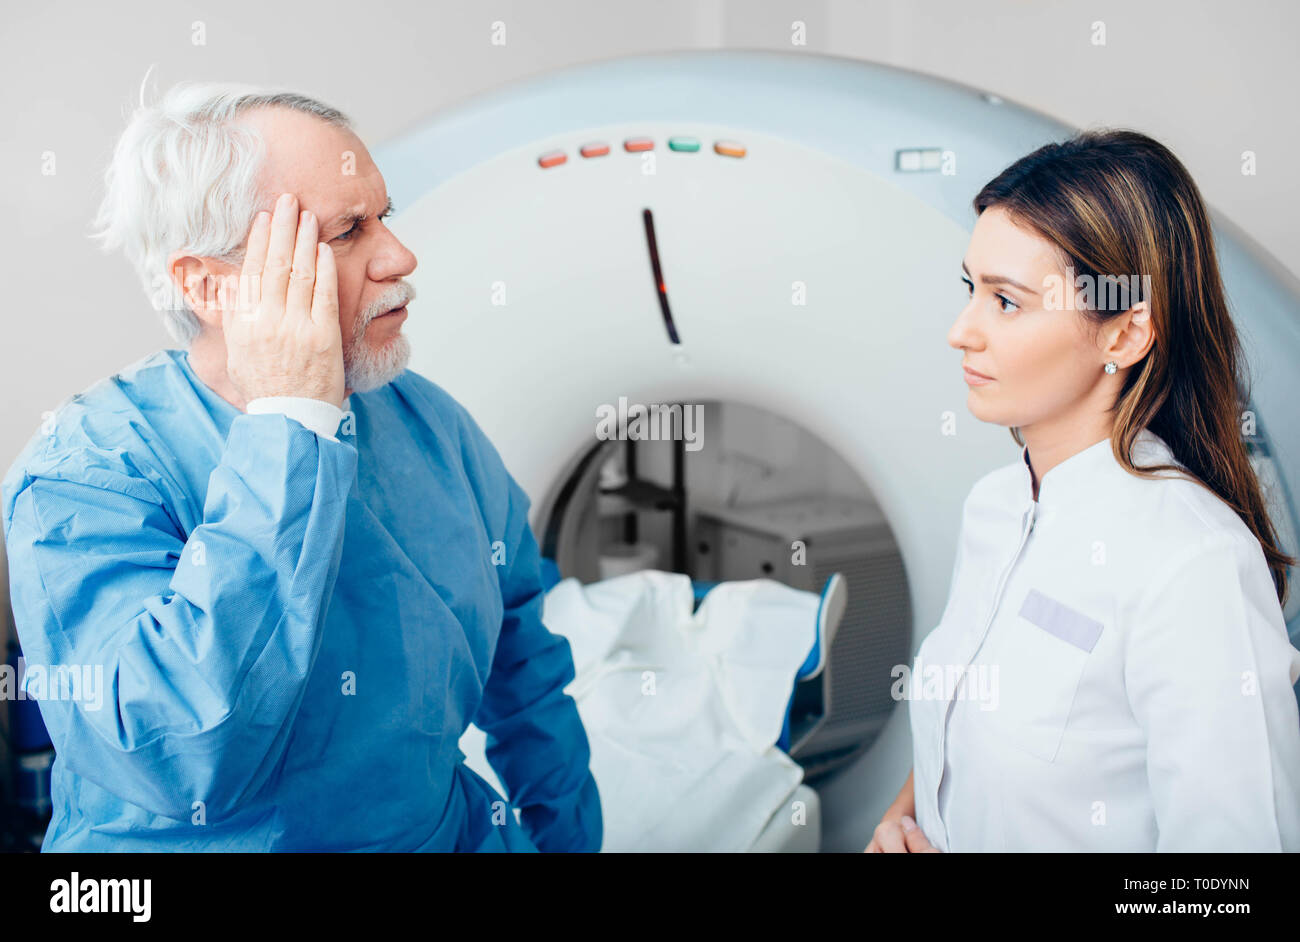 Senior patient complaint of head pain to his doctor while sitting on scanner table. Stock Photo